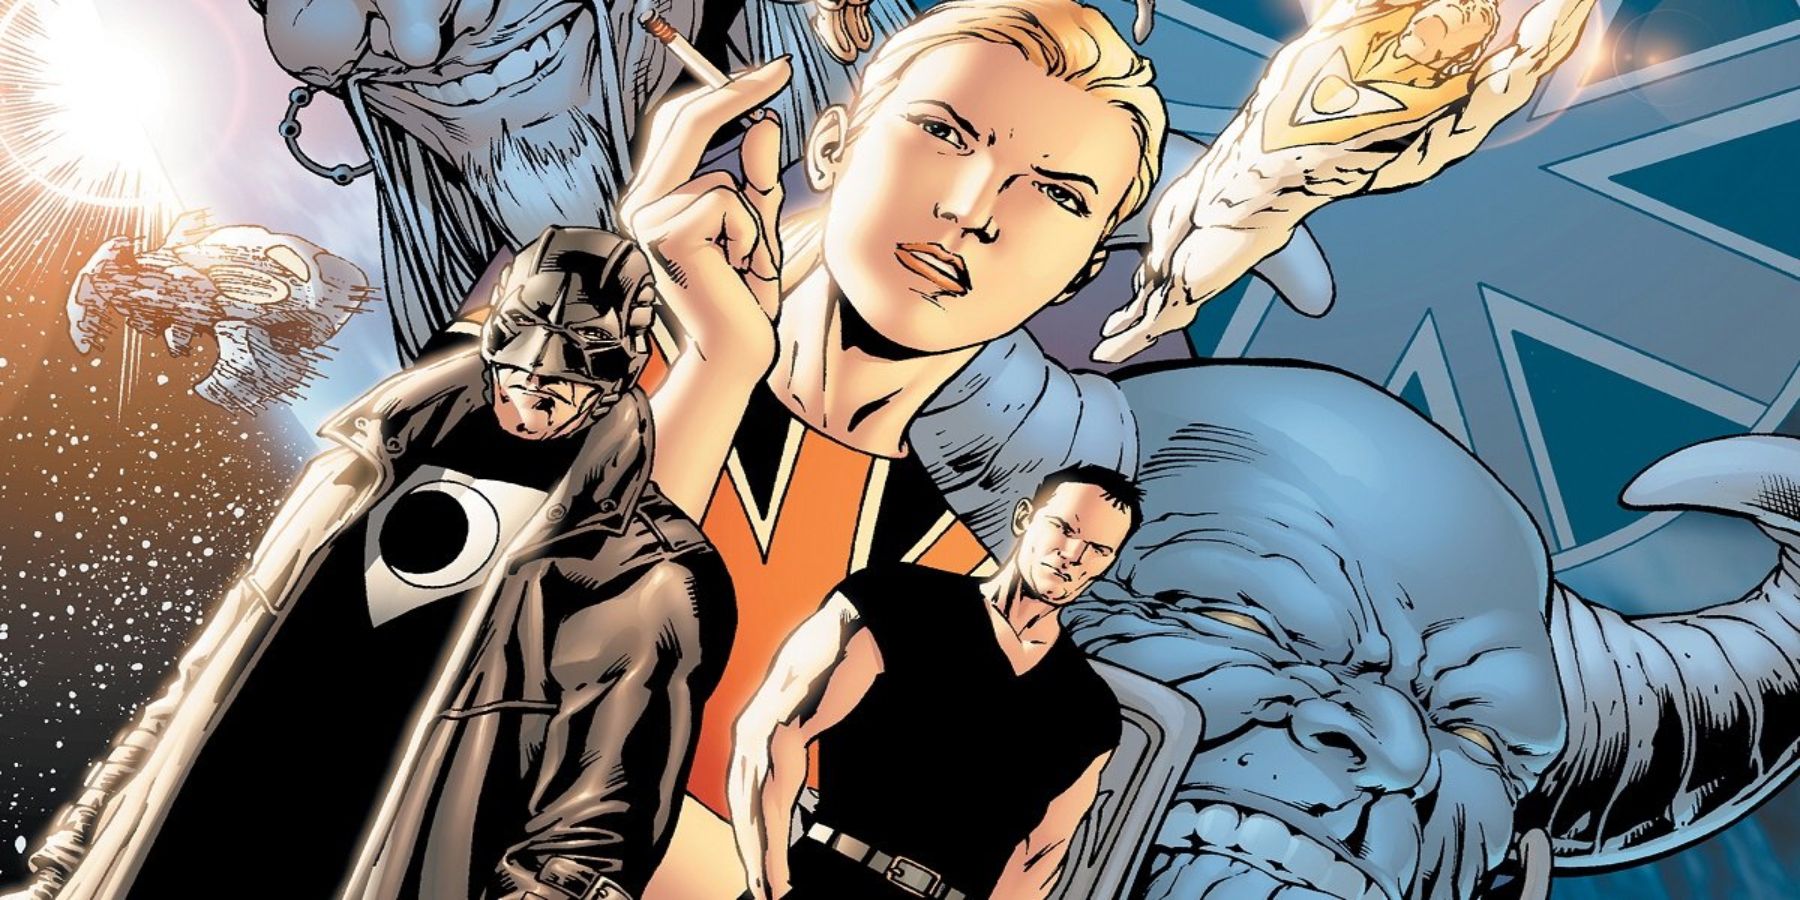 Midnighter, Jenny Sparks, Jack Hawksmoor and The Authority's Apollo